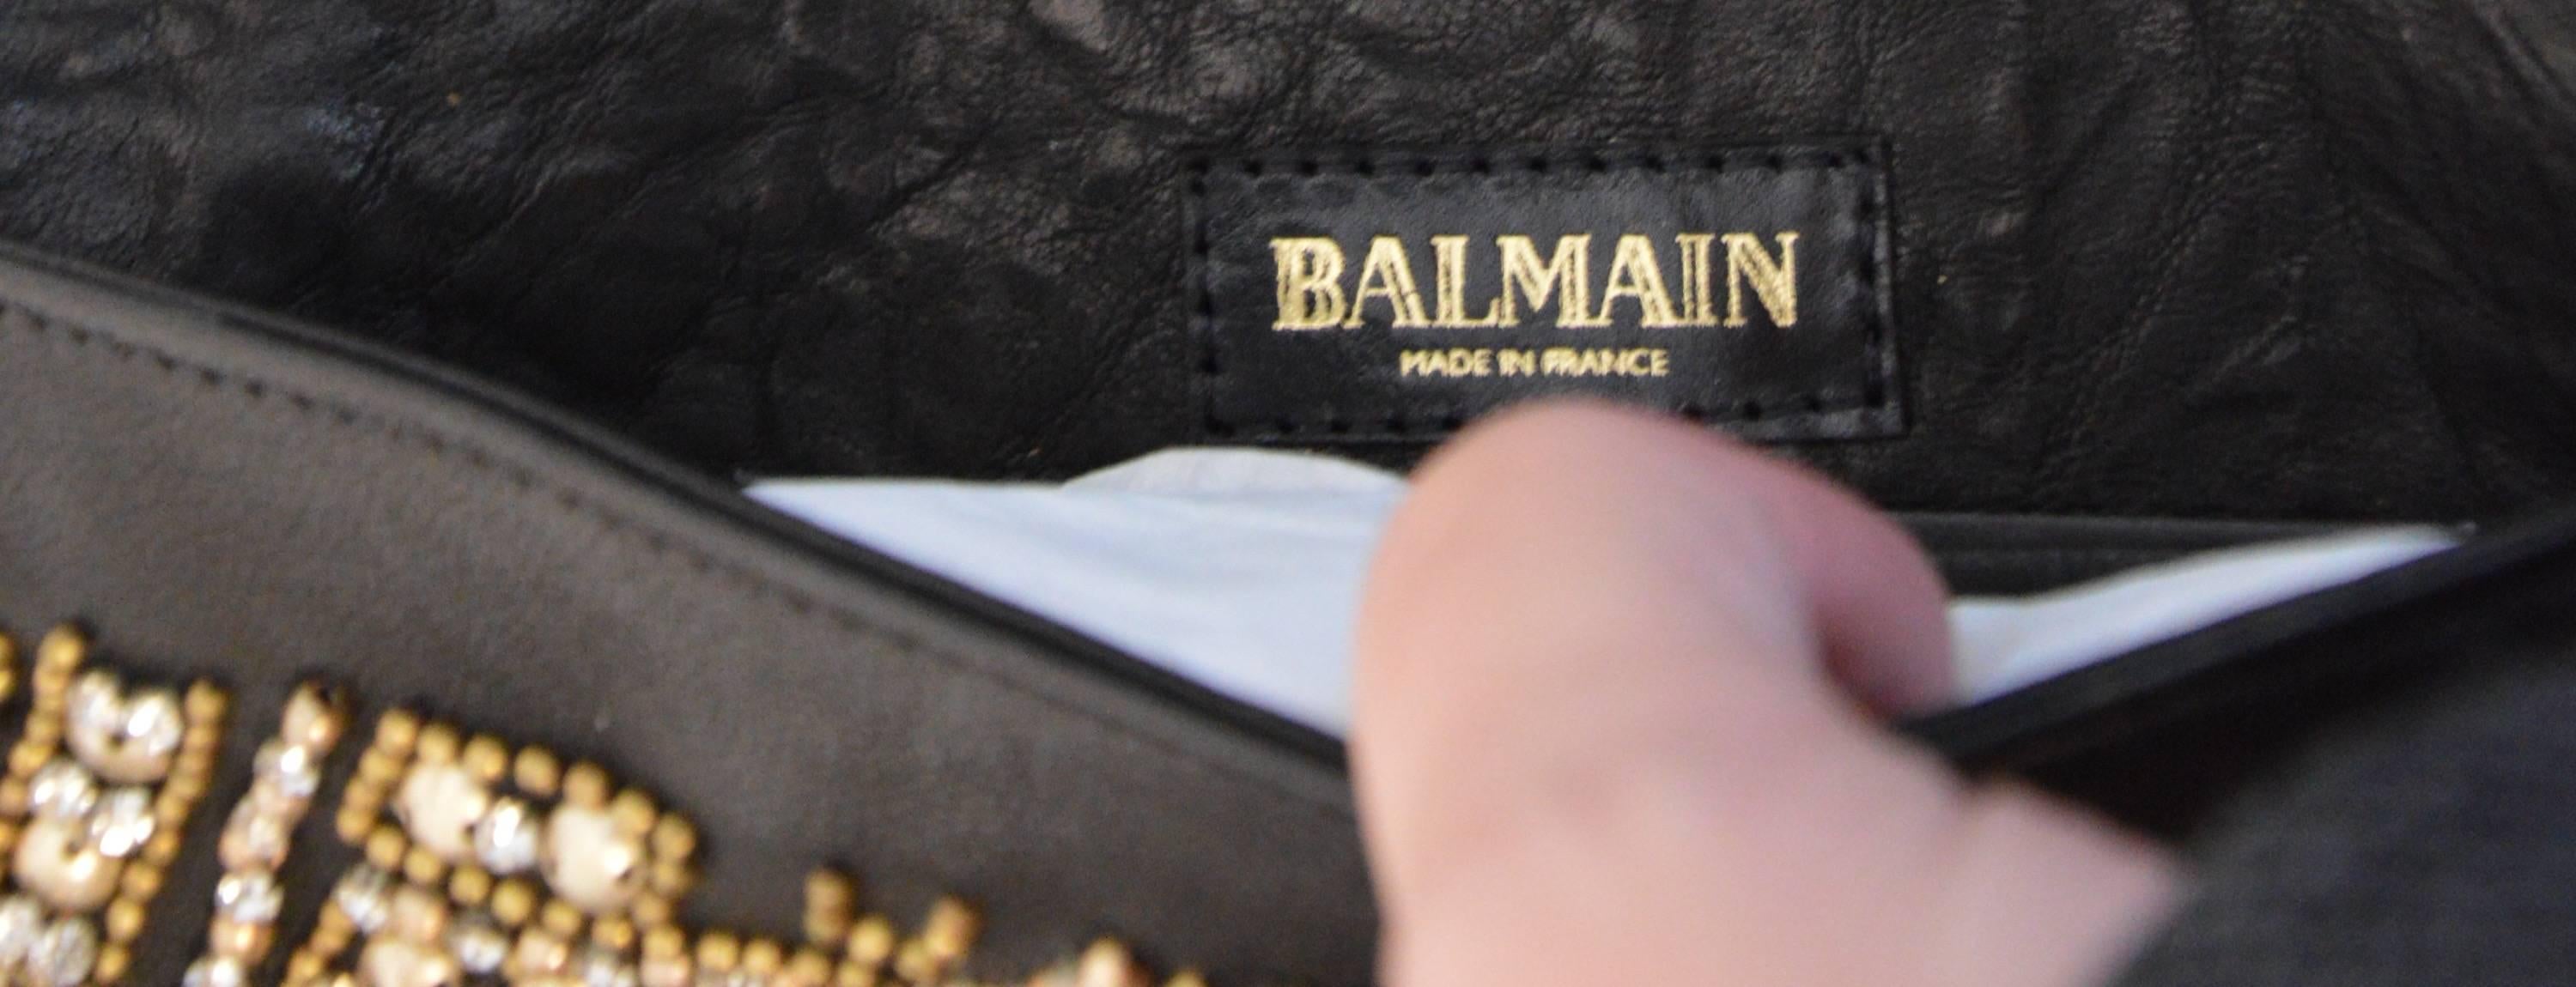 Rare Olivier Rousteing for Balmain Black Embroidered Leather Clutch For Sale 1